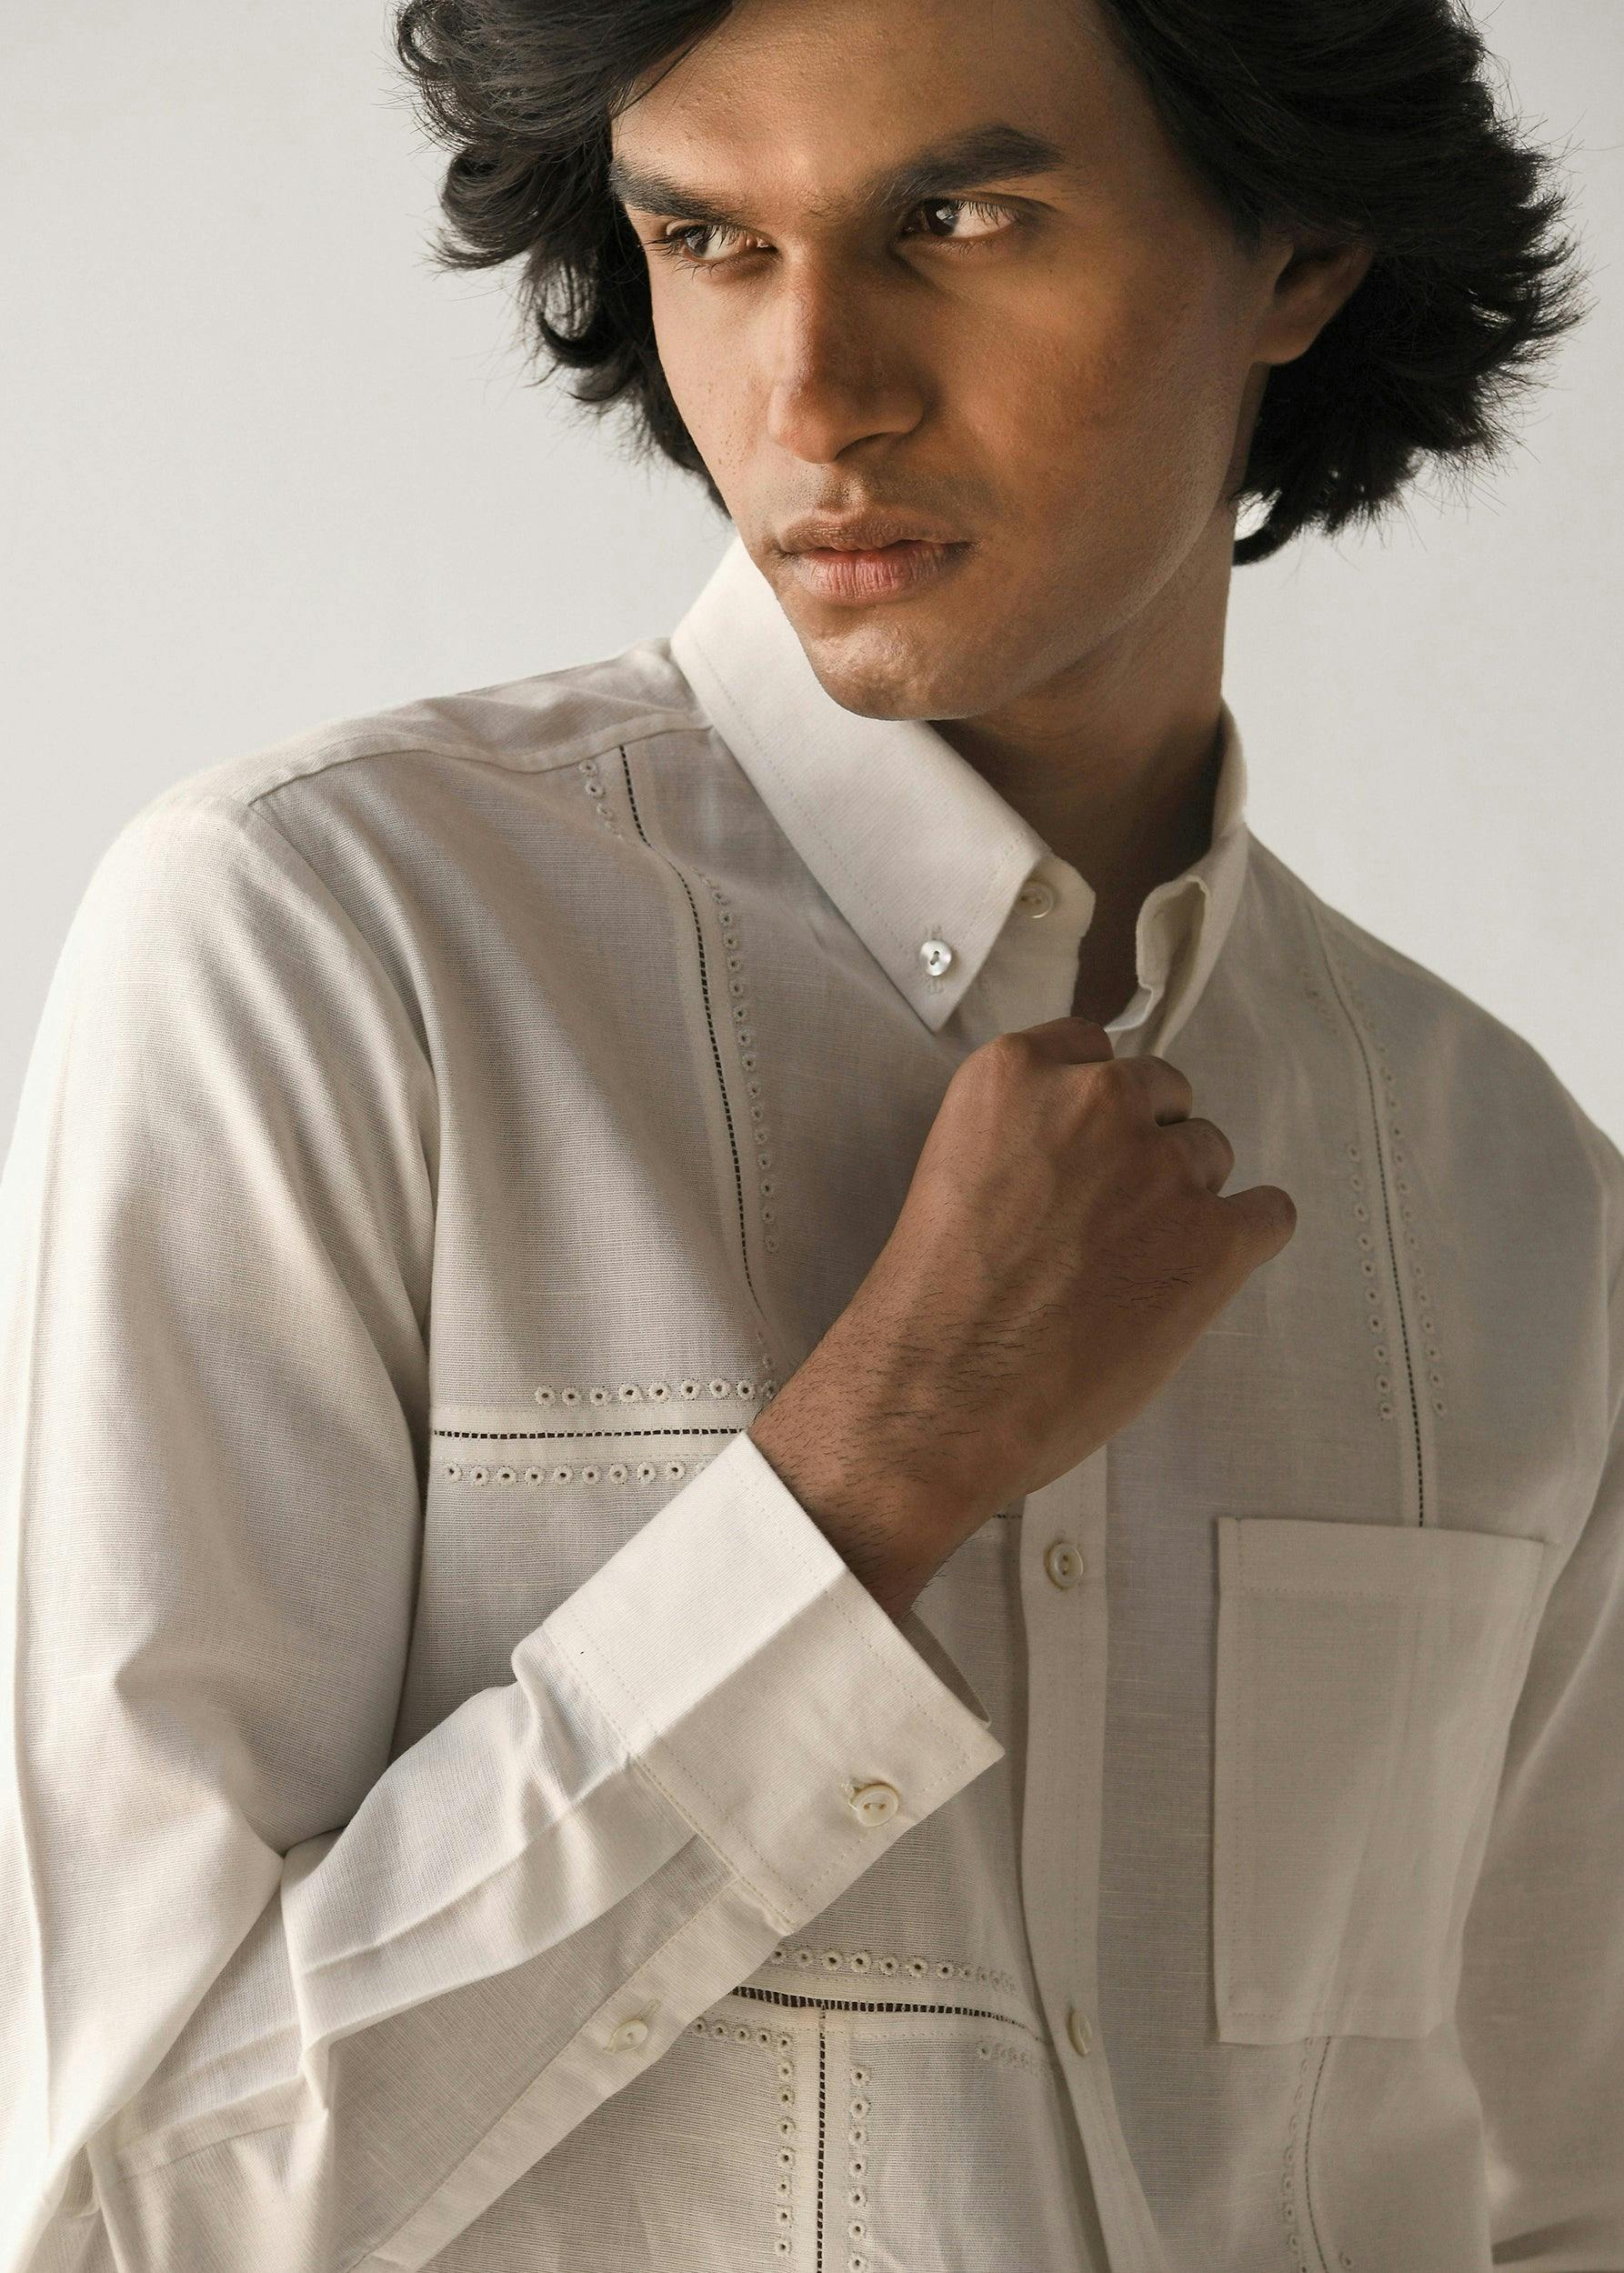 Fuselage Fagotting Shirt, a product by Country Made